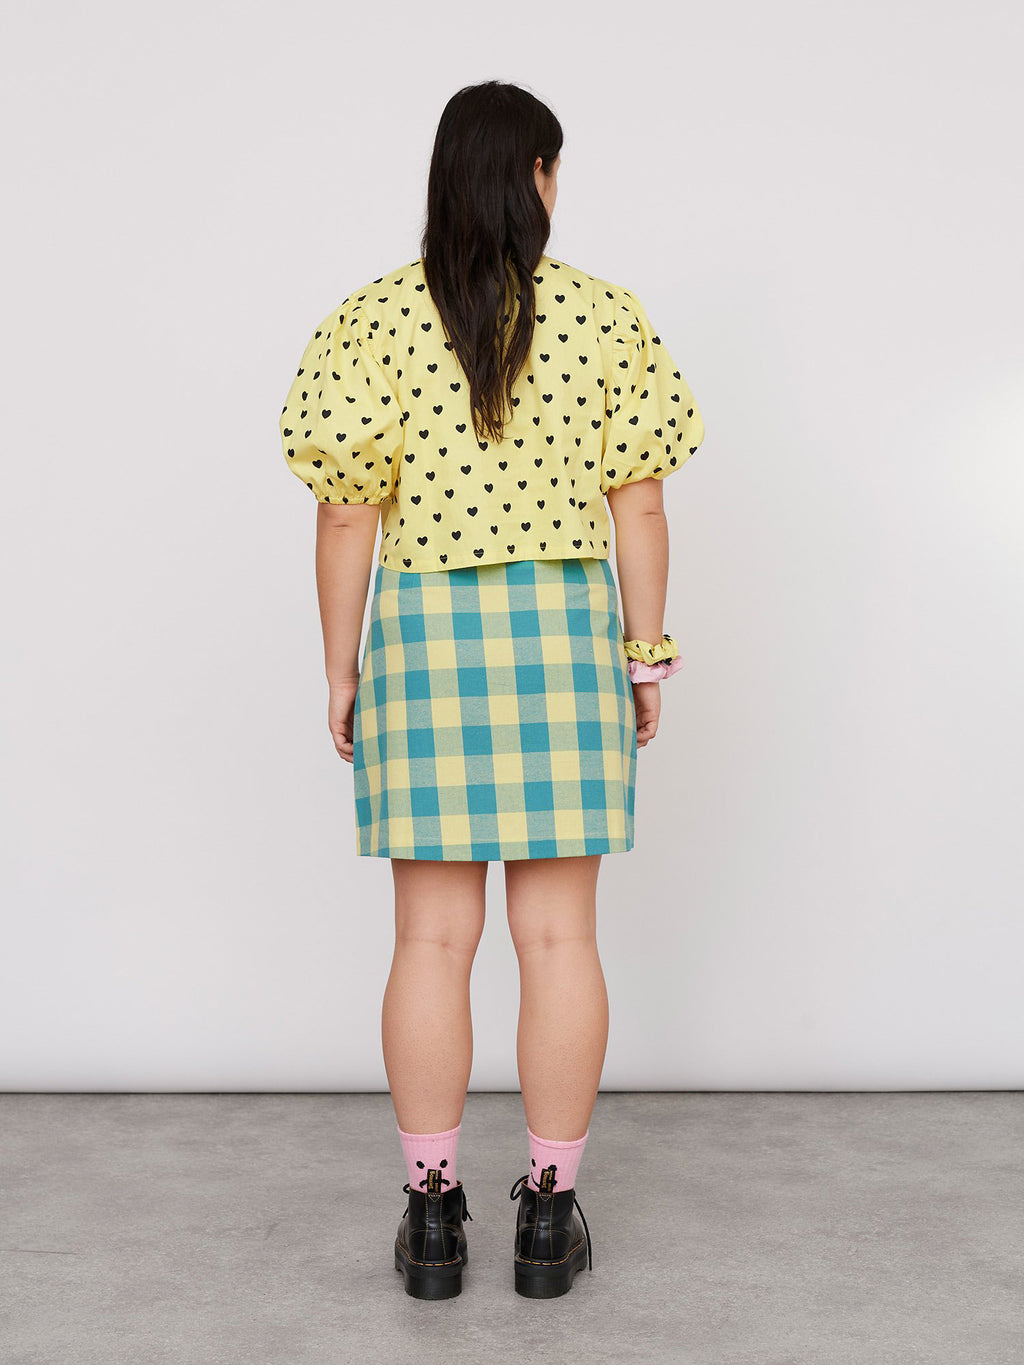 Lazy Oaf Blue and Yellow Gingham Skirt